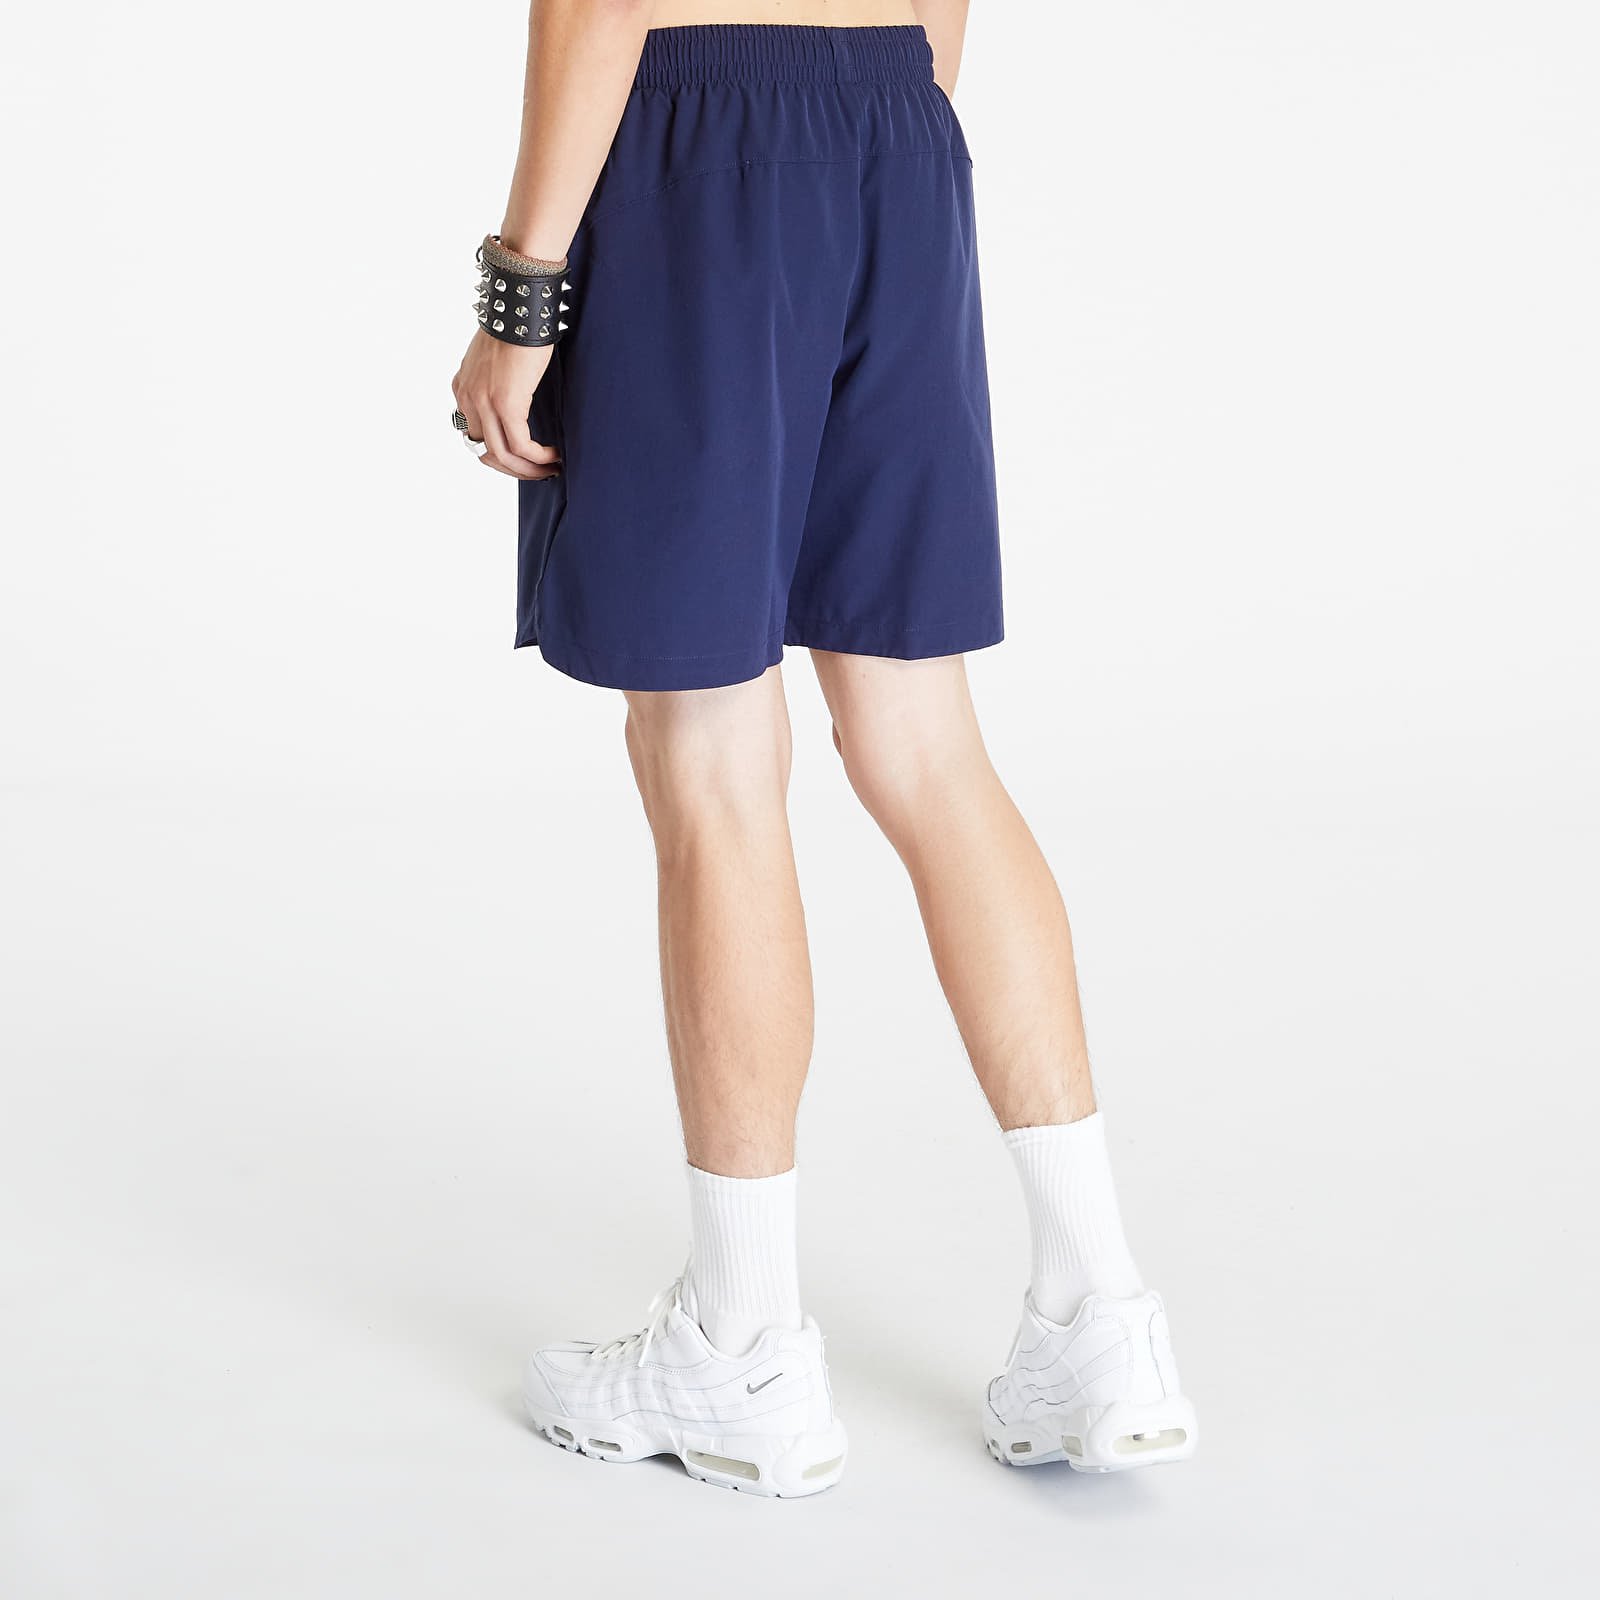 Project Rock Woven Shorts Midnight Navy/ White